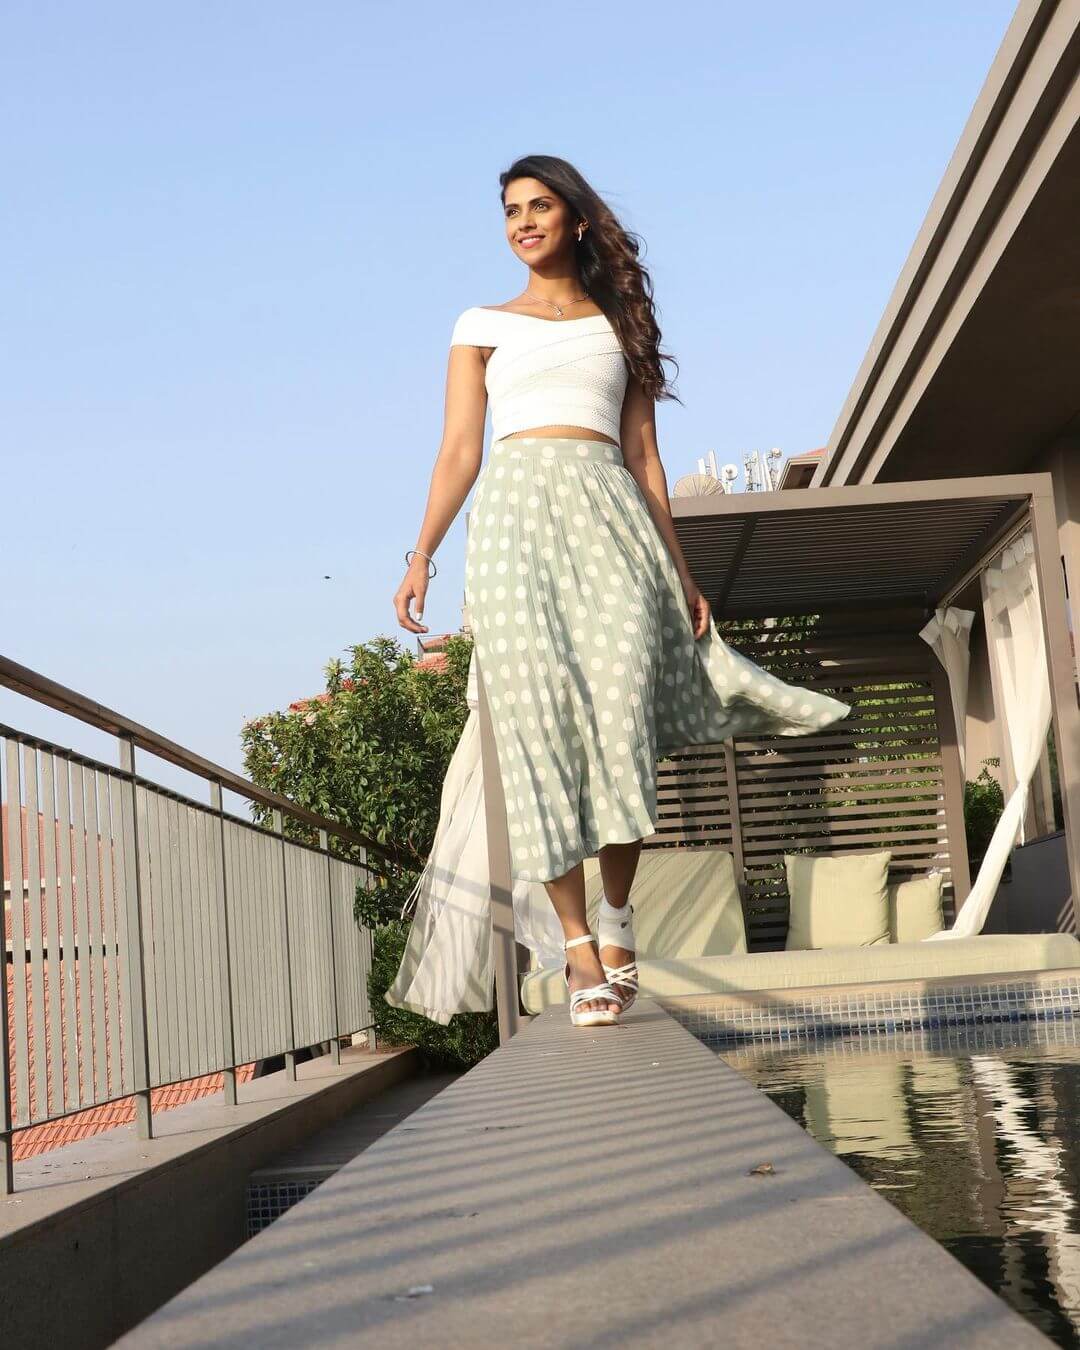 Aditi Sarangdhar Cool,Breezy & Ethnical Outfit Looks: Western Outfit 